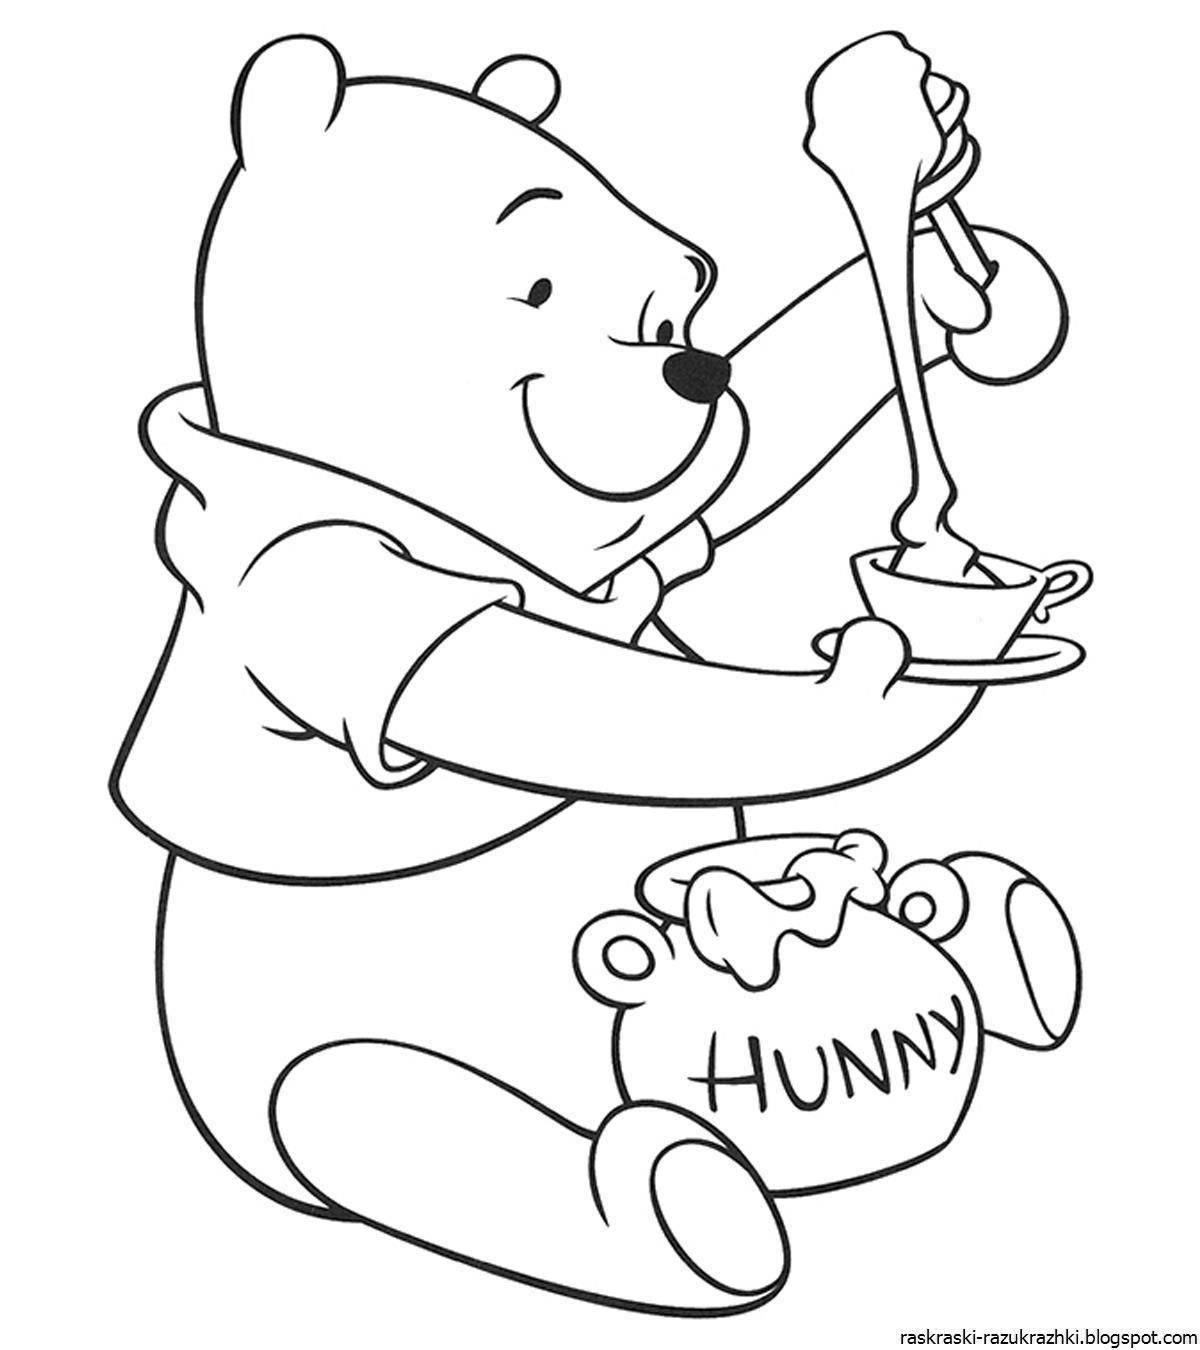 Winnie the Pooh creative coloring for kids